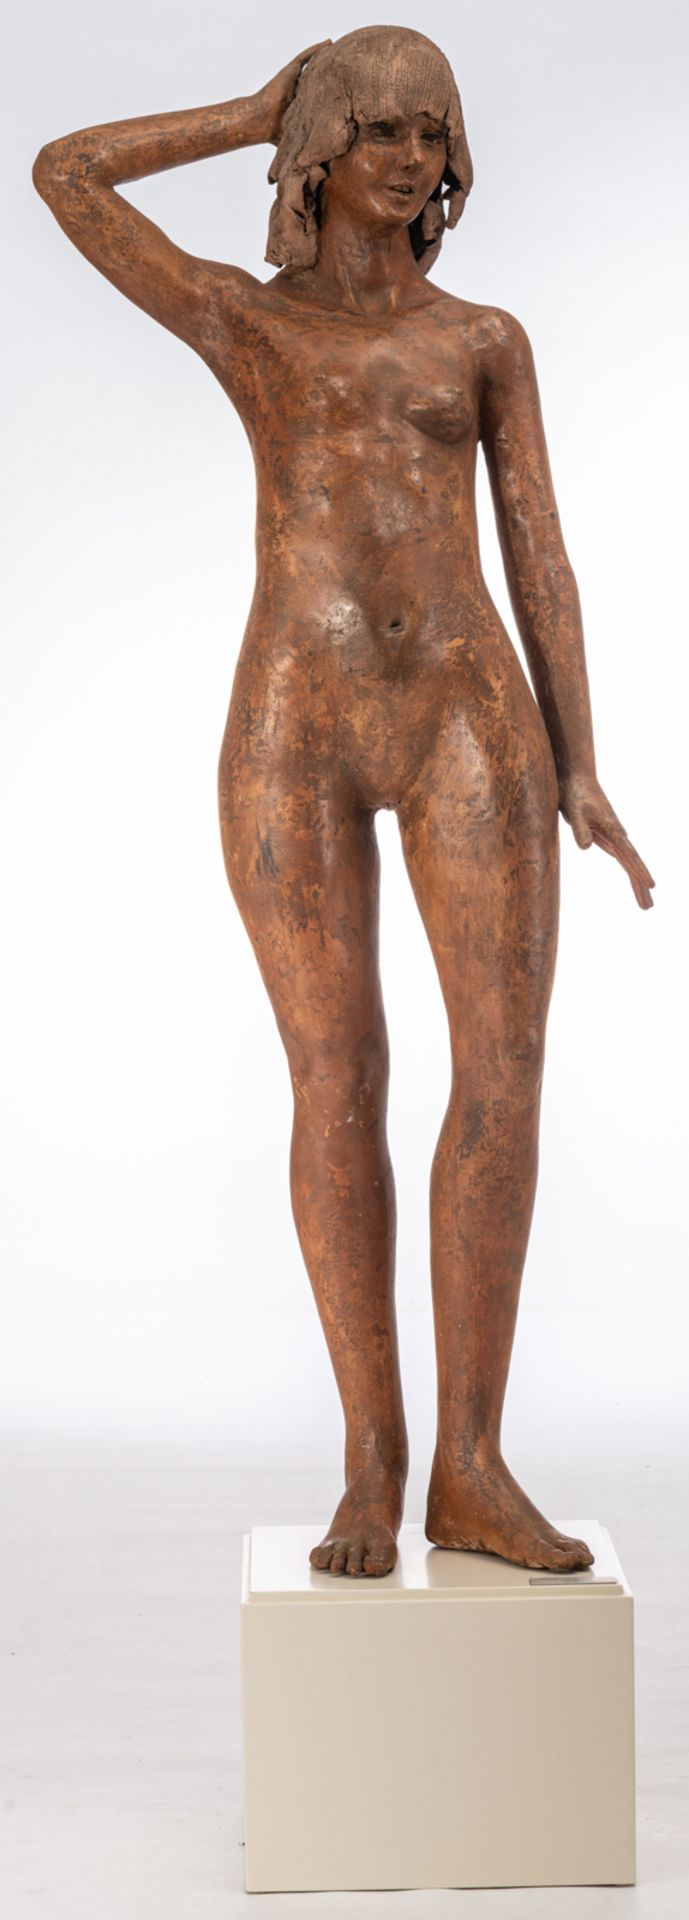 Dumortier J., 'Sirene', a patinated terracotta sculpture of a naked standing woman, on a white paint - Image 2 of 6